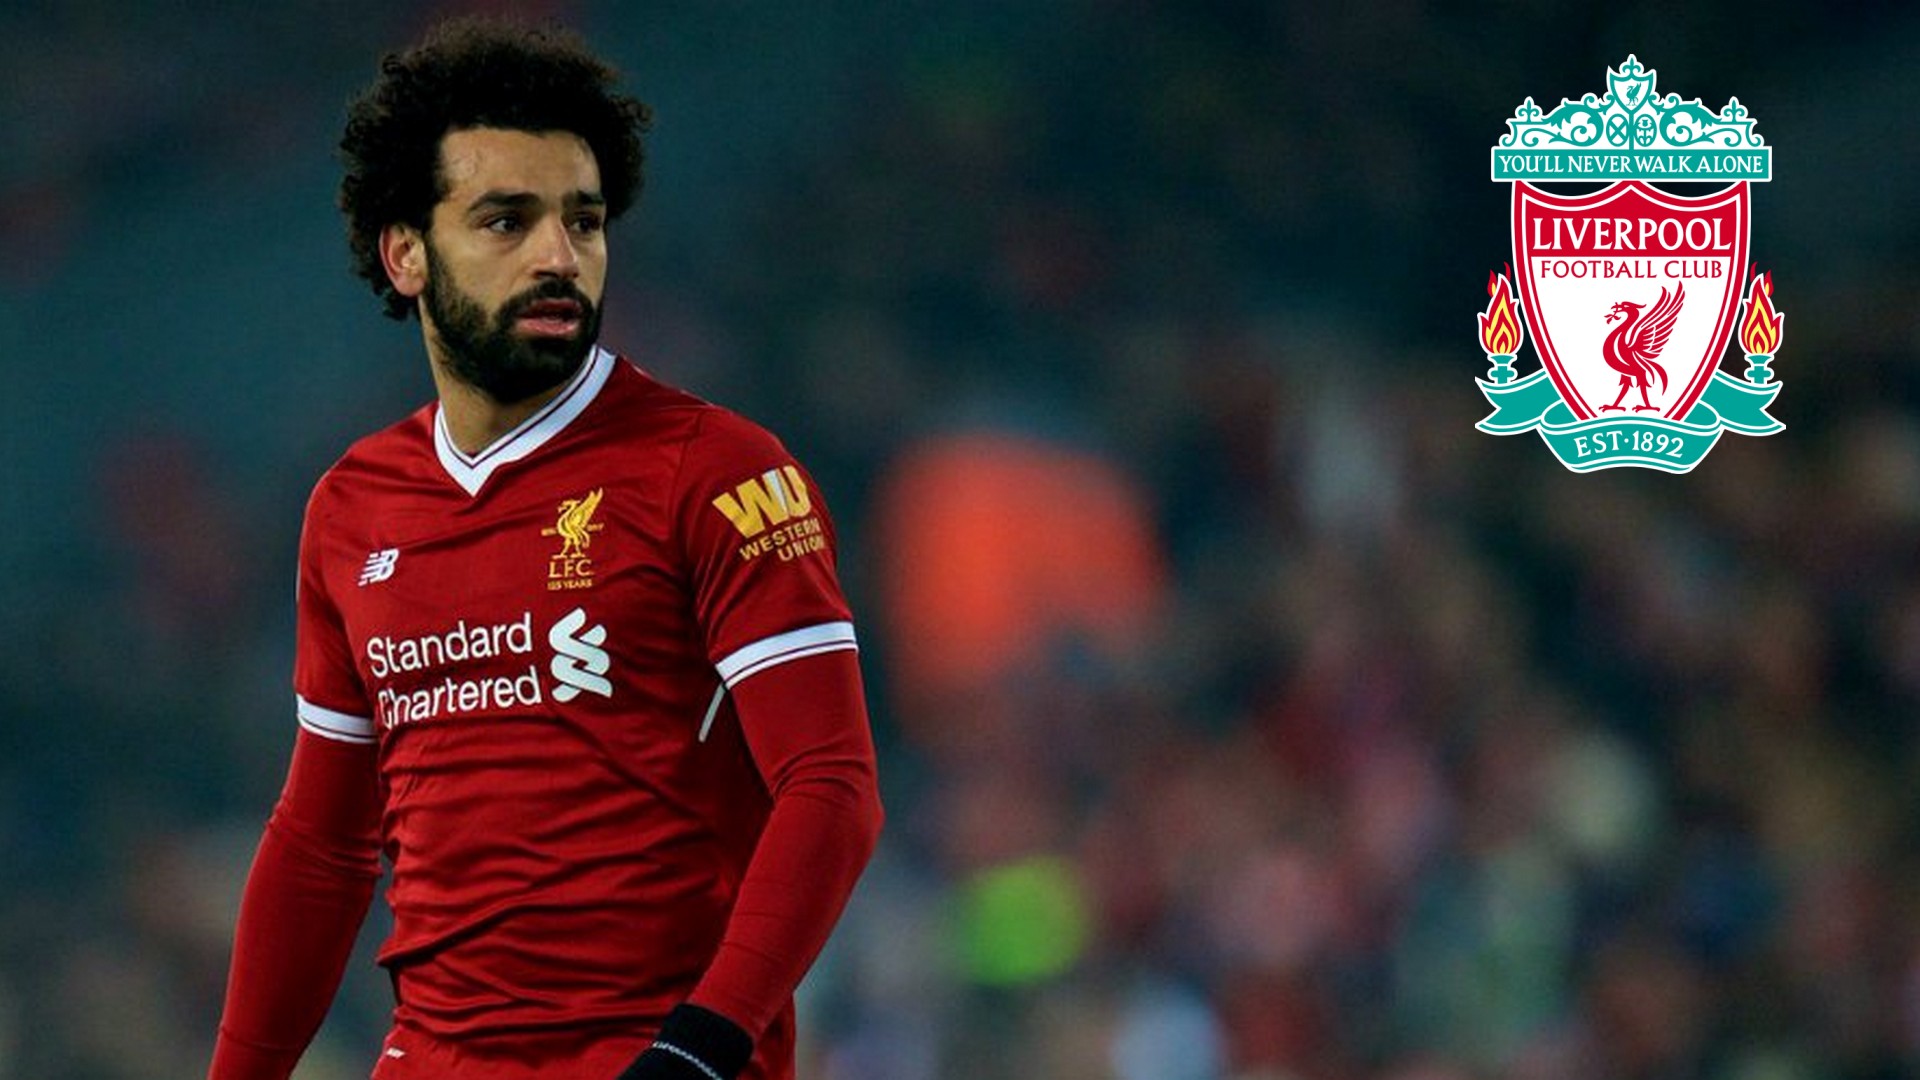 Best Liverpool Mohamed Salah Wallpaper with resolution 1920X1080 pixel. You can use this wallpaper as background for your desktop Computer Screensavers, Android or iPhone smartphones